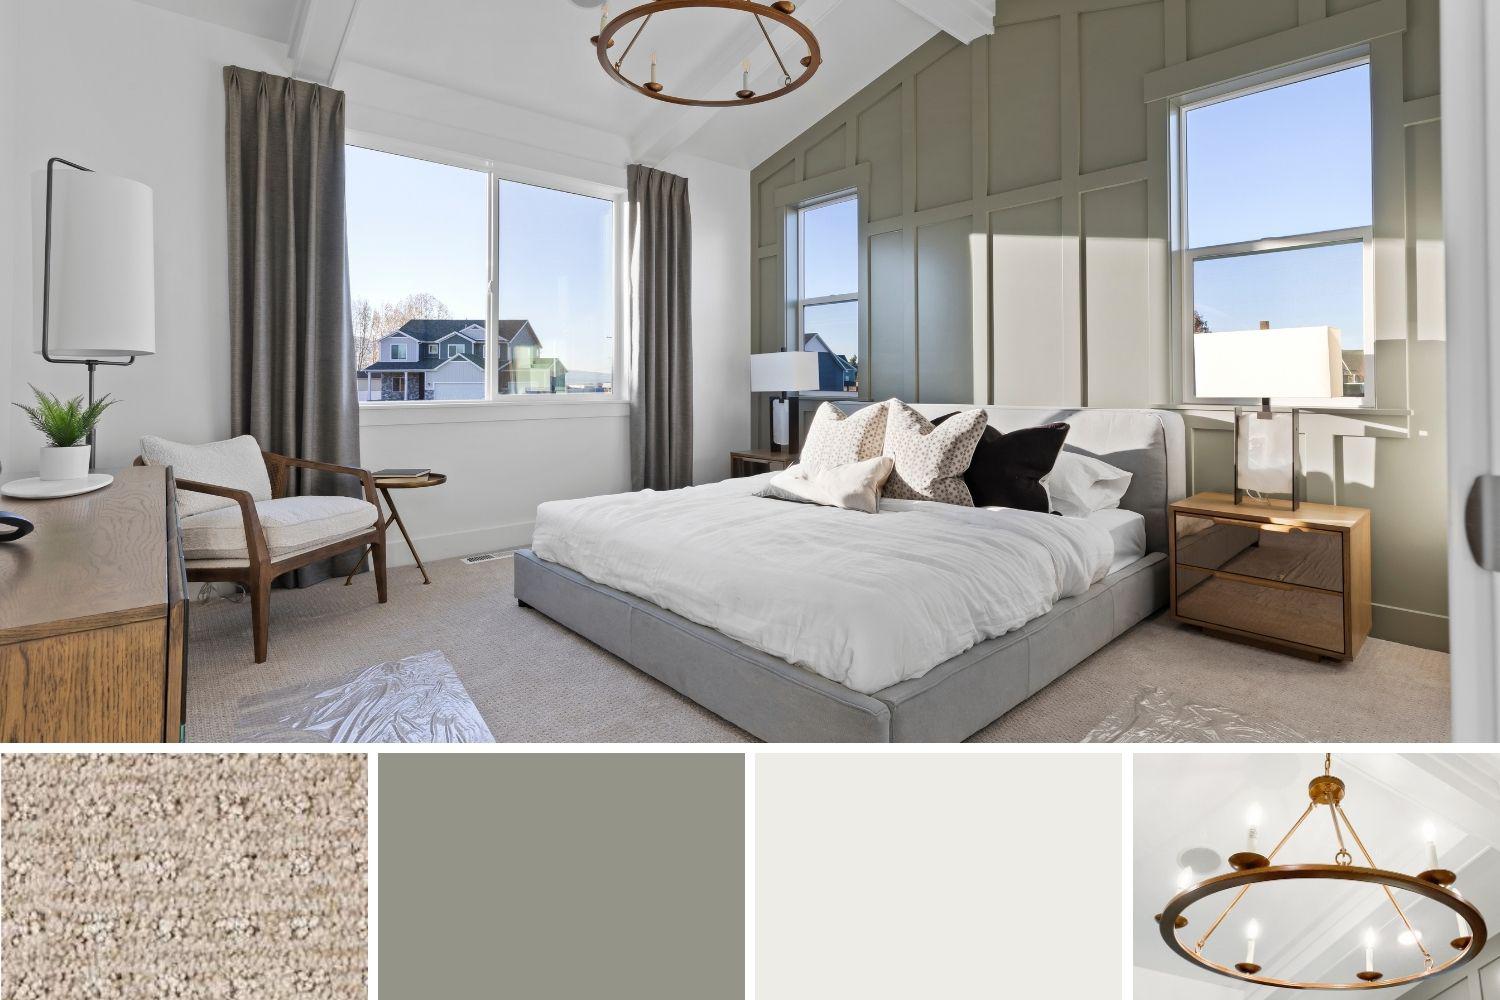 Get The Look Series: How to Design Your Bedroom Similar to Our Sumac Model Home Owner’s Suite